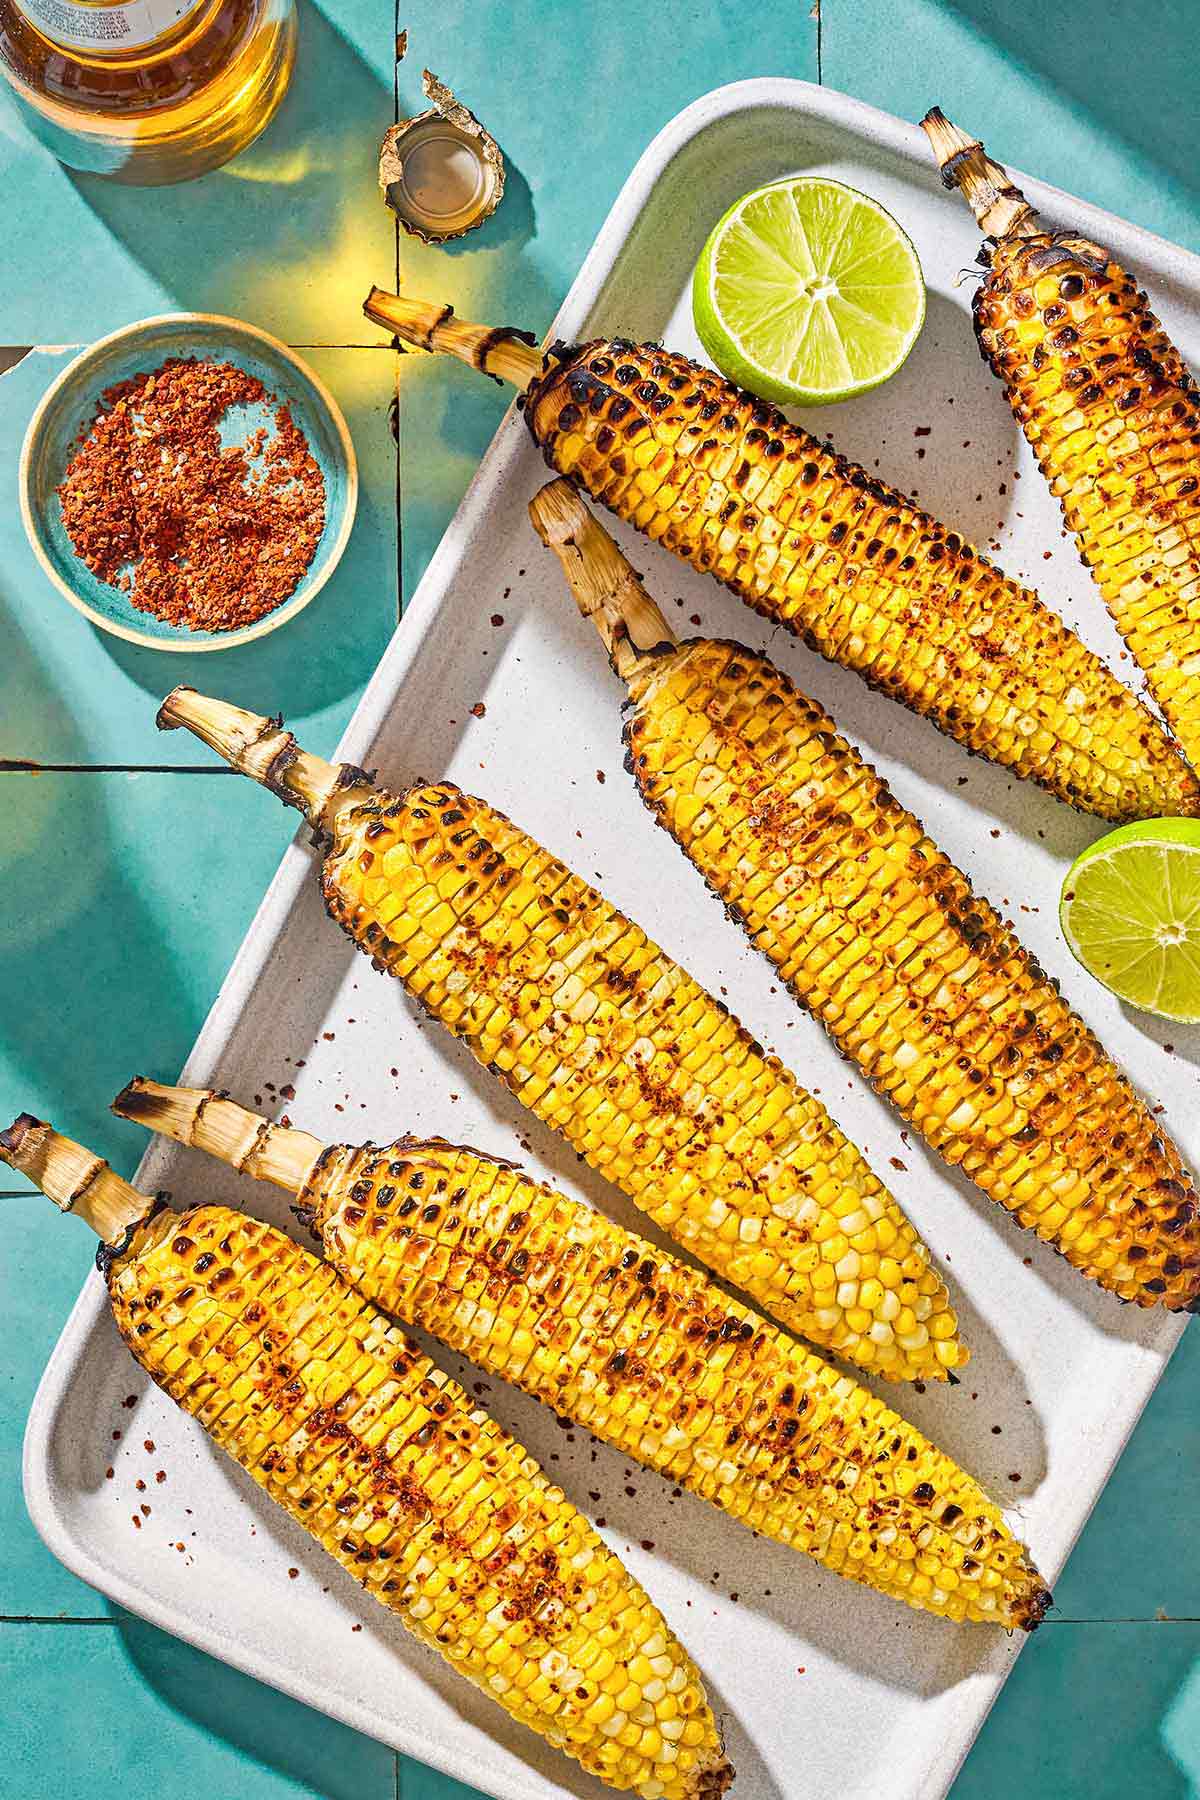 An overhead photo of 6 grilled corncobs on a serving platter with 2 lime halves. Next to this is a small bowl of Aleppo pepper and a bottle of beer.